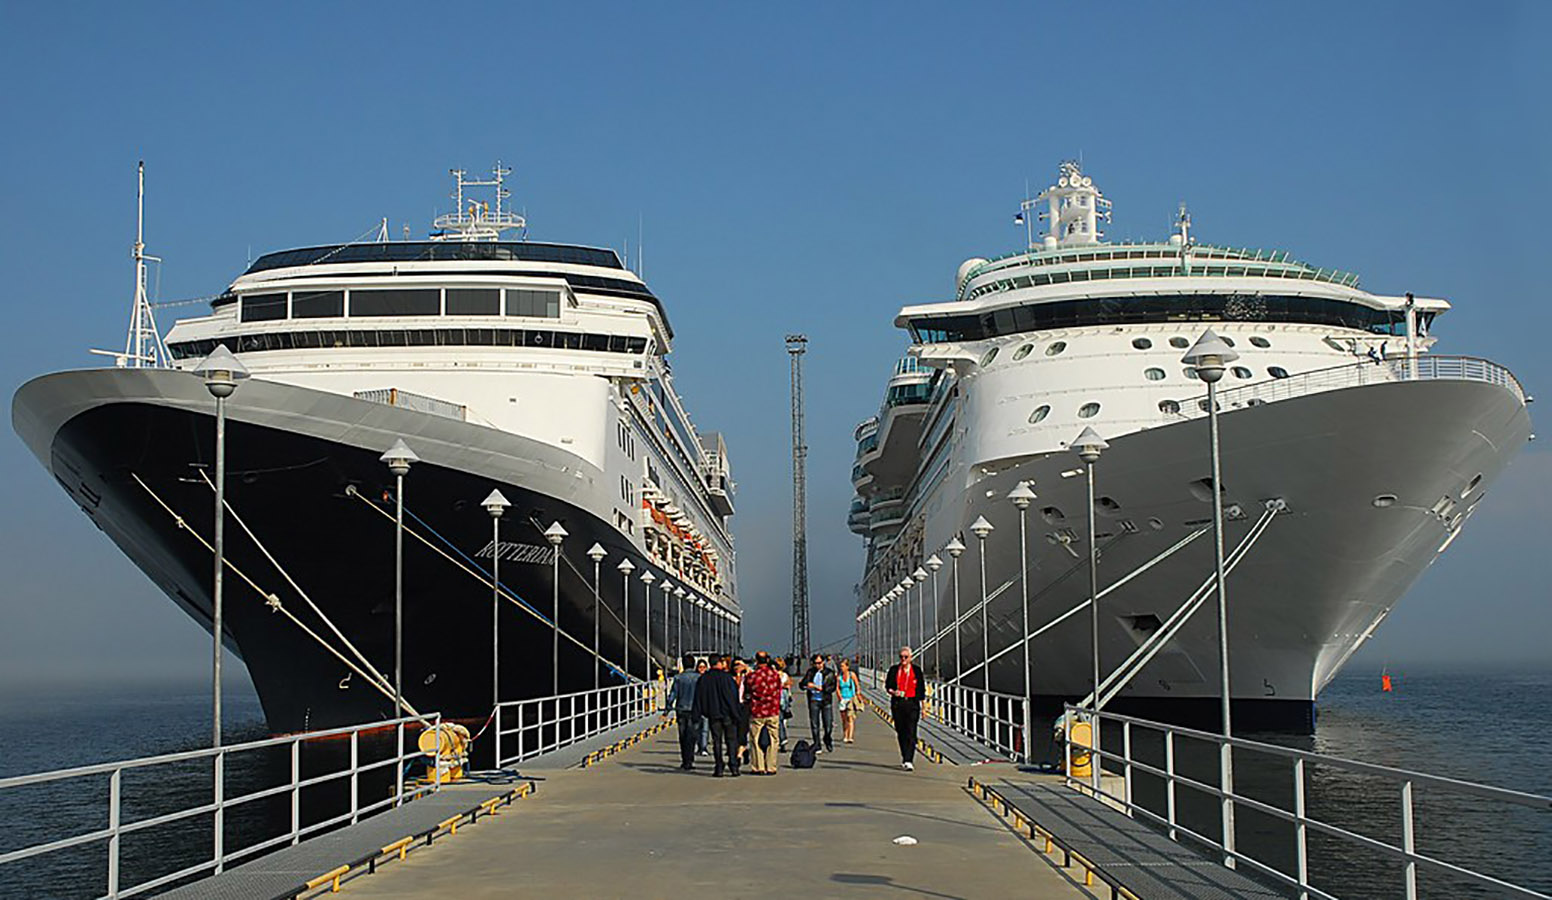 Two large cruise ships docked side-by-side with a group of white tourists between them.